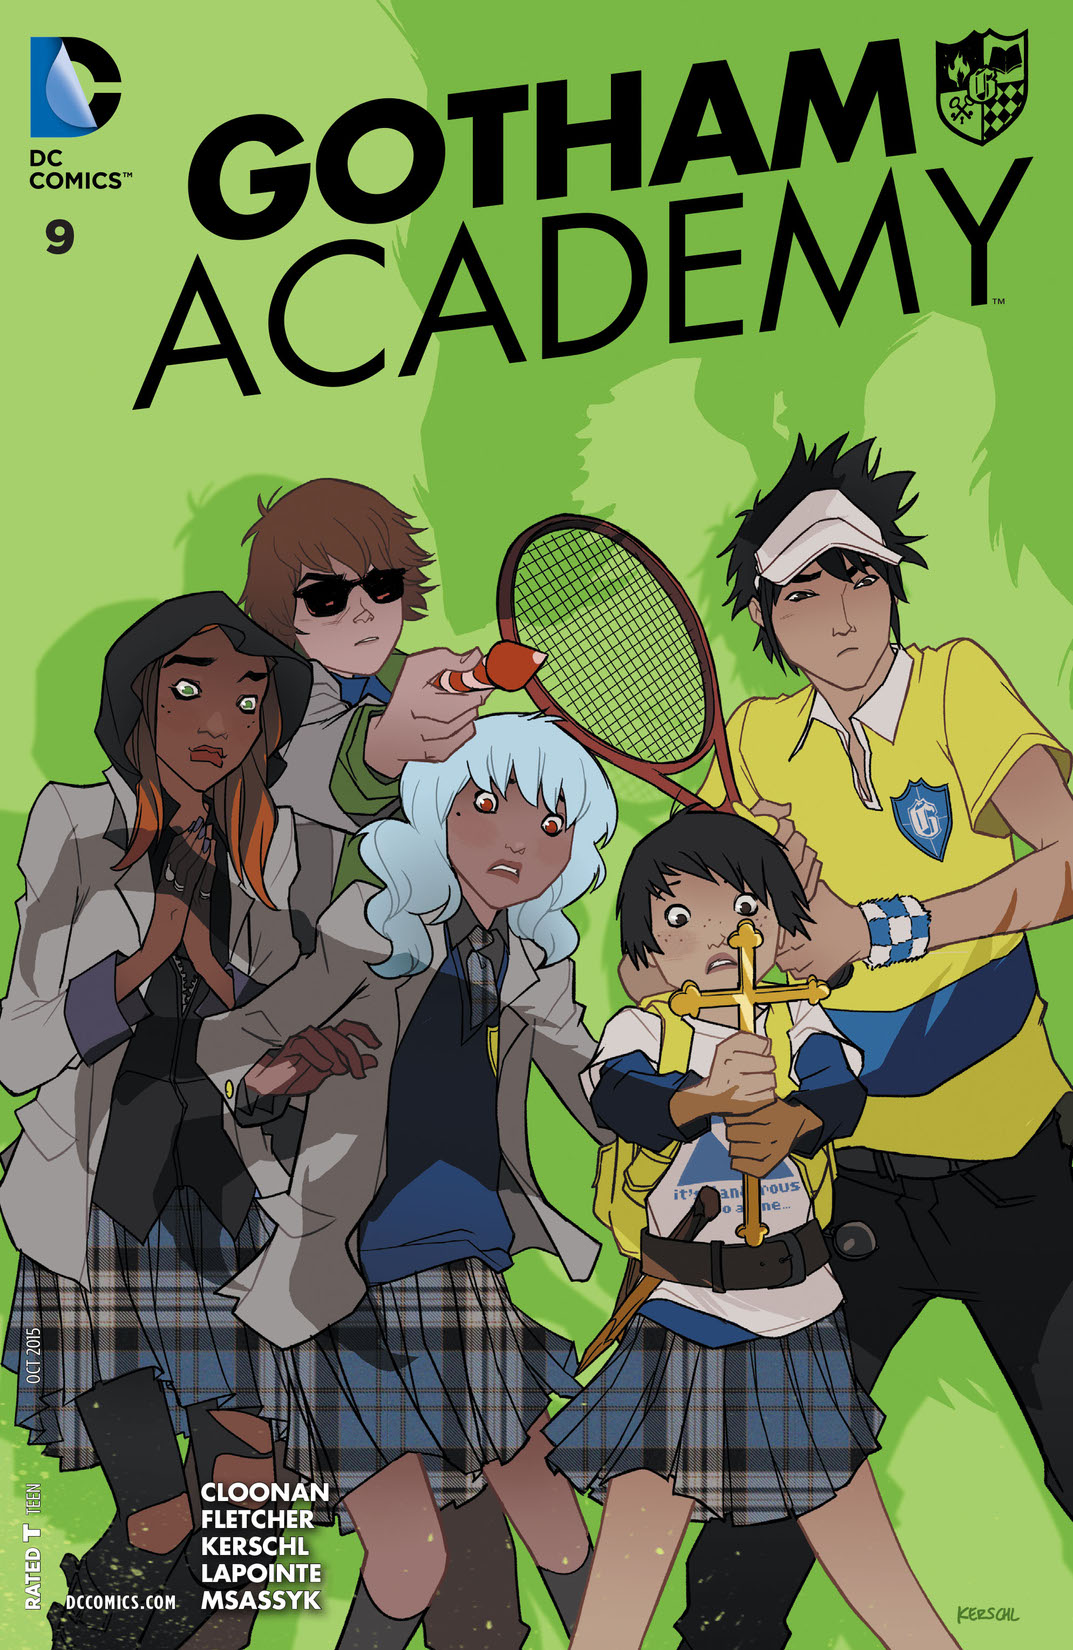 Gotham Academy #9 preview images